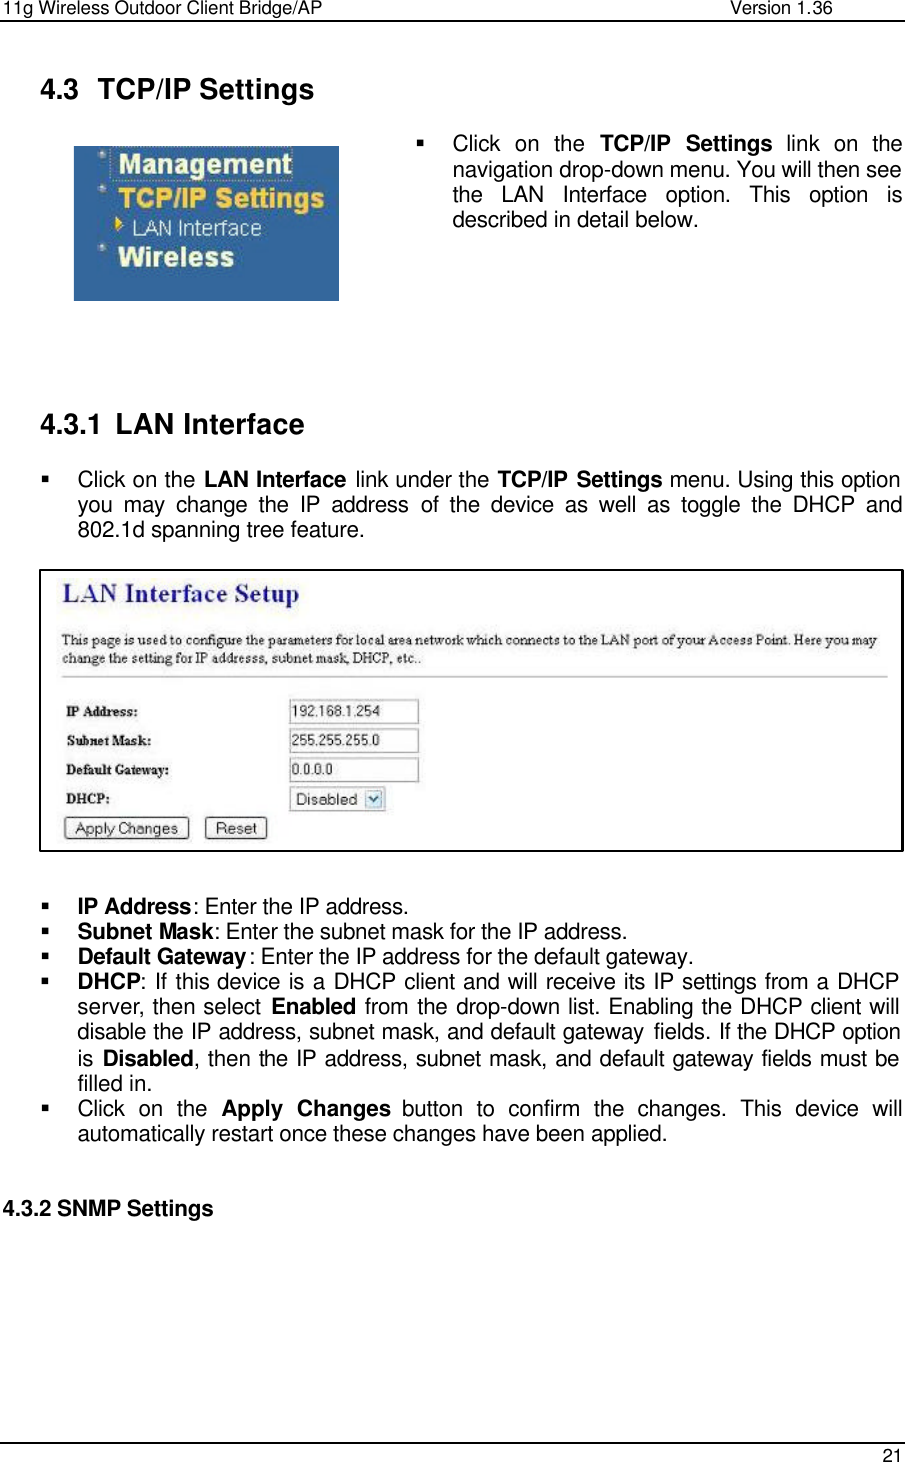 11g Wireless Outdoor Client Bridge/AP                Version 1.36    21   4.3 TCP/IP Settings § Click on the TCP/IP Settings link on the navigation drop-down menu. You will then see the LAN Interface option. This option is described in detail below.          4.3.1 LAN Interface § Click on the LAN Interface link under the TCP/IP Settings menu. Using this option you may change the IP address of the device as well as toggle the DHCP and 802.1d spanning tree feature.               § IP Address: Enter the IP address. § Subnet Mask: Enter the subnet mask for the IP address. § Default Gateway: Enter the IP address for the default gateway. § DHCP: If this device is a DHCP client and will receive its IP settings from a DHCP server, then select Enabled from the drop-down list. Enabling the DHCP client will disable the IP address, subnet mask, and default gateway fields. If the DHCP option is Disabled, then the IP address, subnet mask, and default gateway fields must be filled in.    § Click on the Apply Changes button to confirm the changes. This device will automatically restart once these changes have been applied.    4.3.2 SNMP Settings   